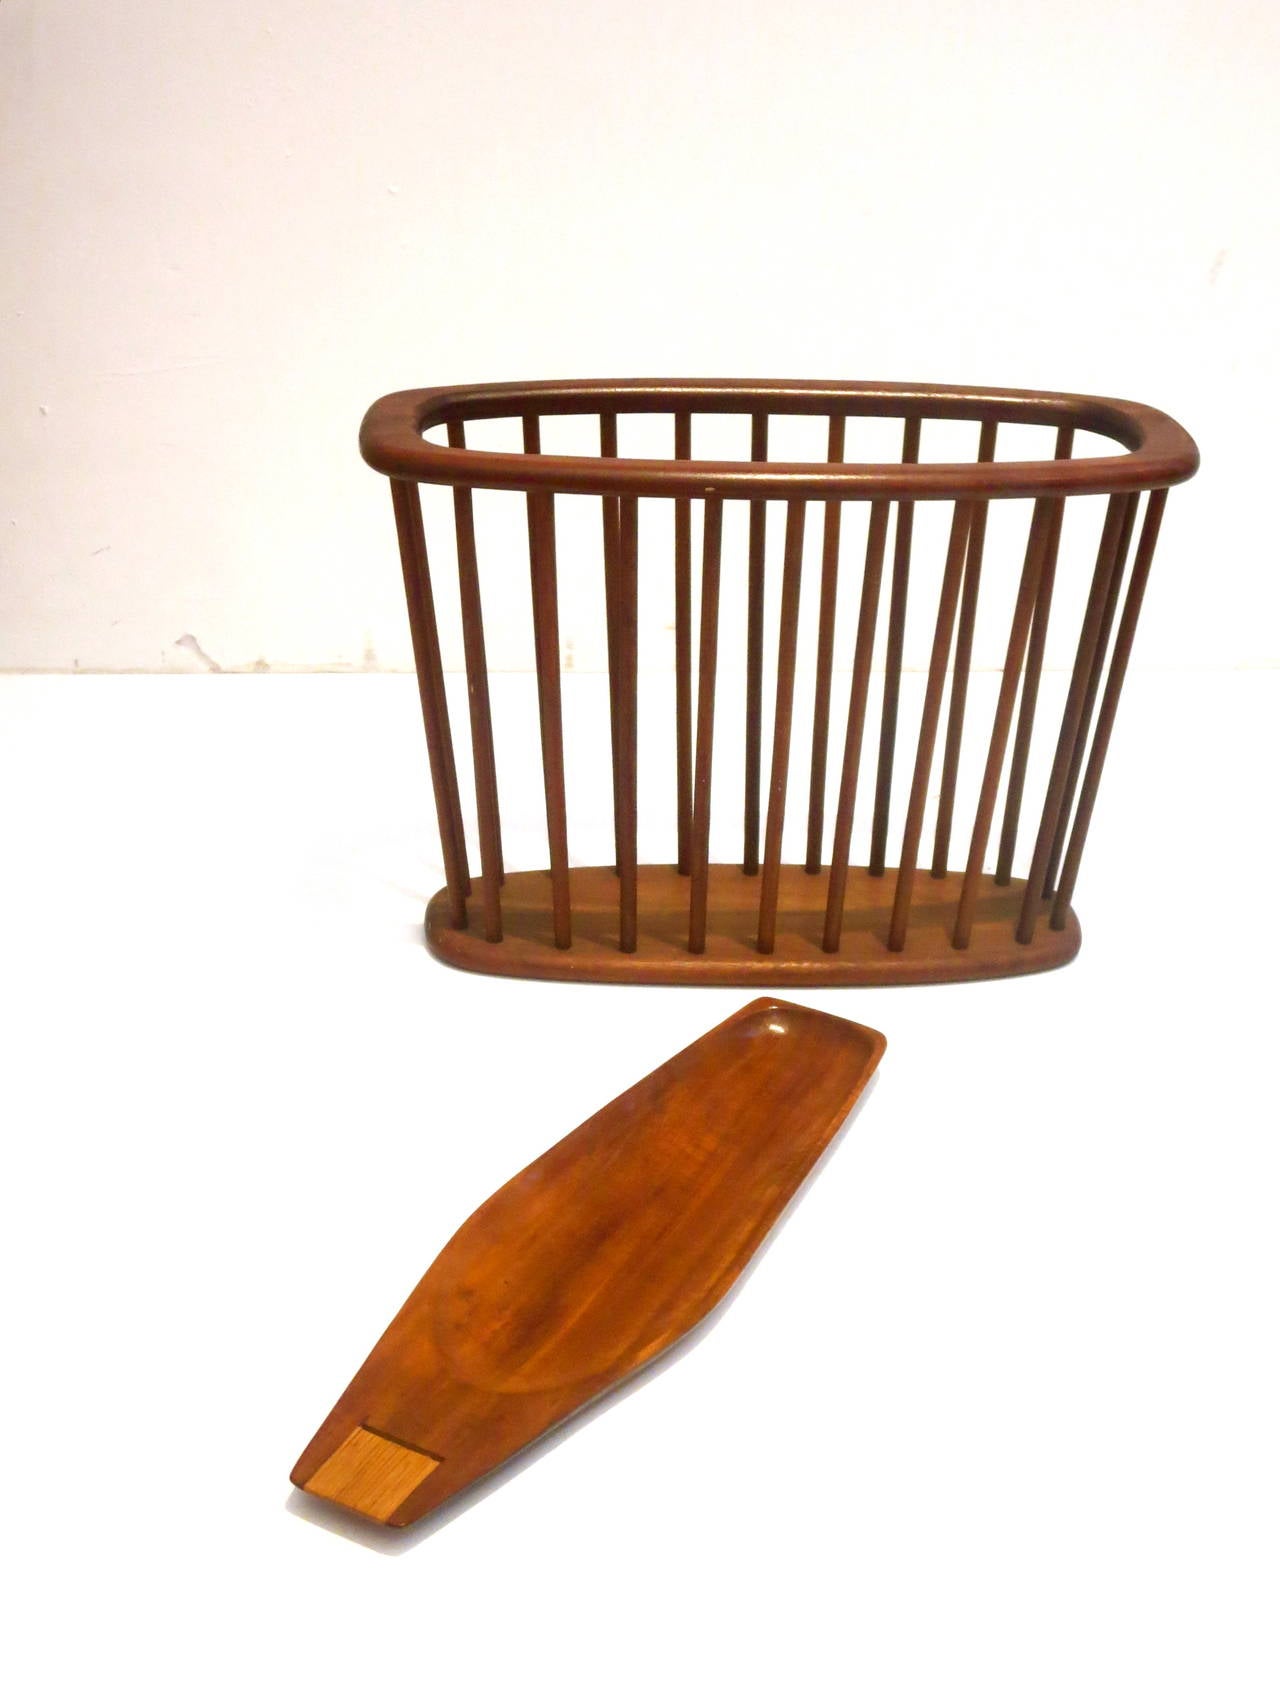 Nice set of solid walnut magazine rack and mahogany serving tray, designed by Arthur Umanoff circa 1950s California design, nice condition the tray is 20 1/2